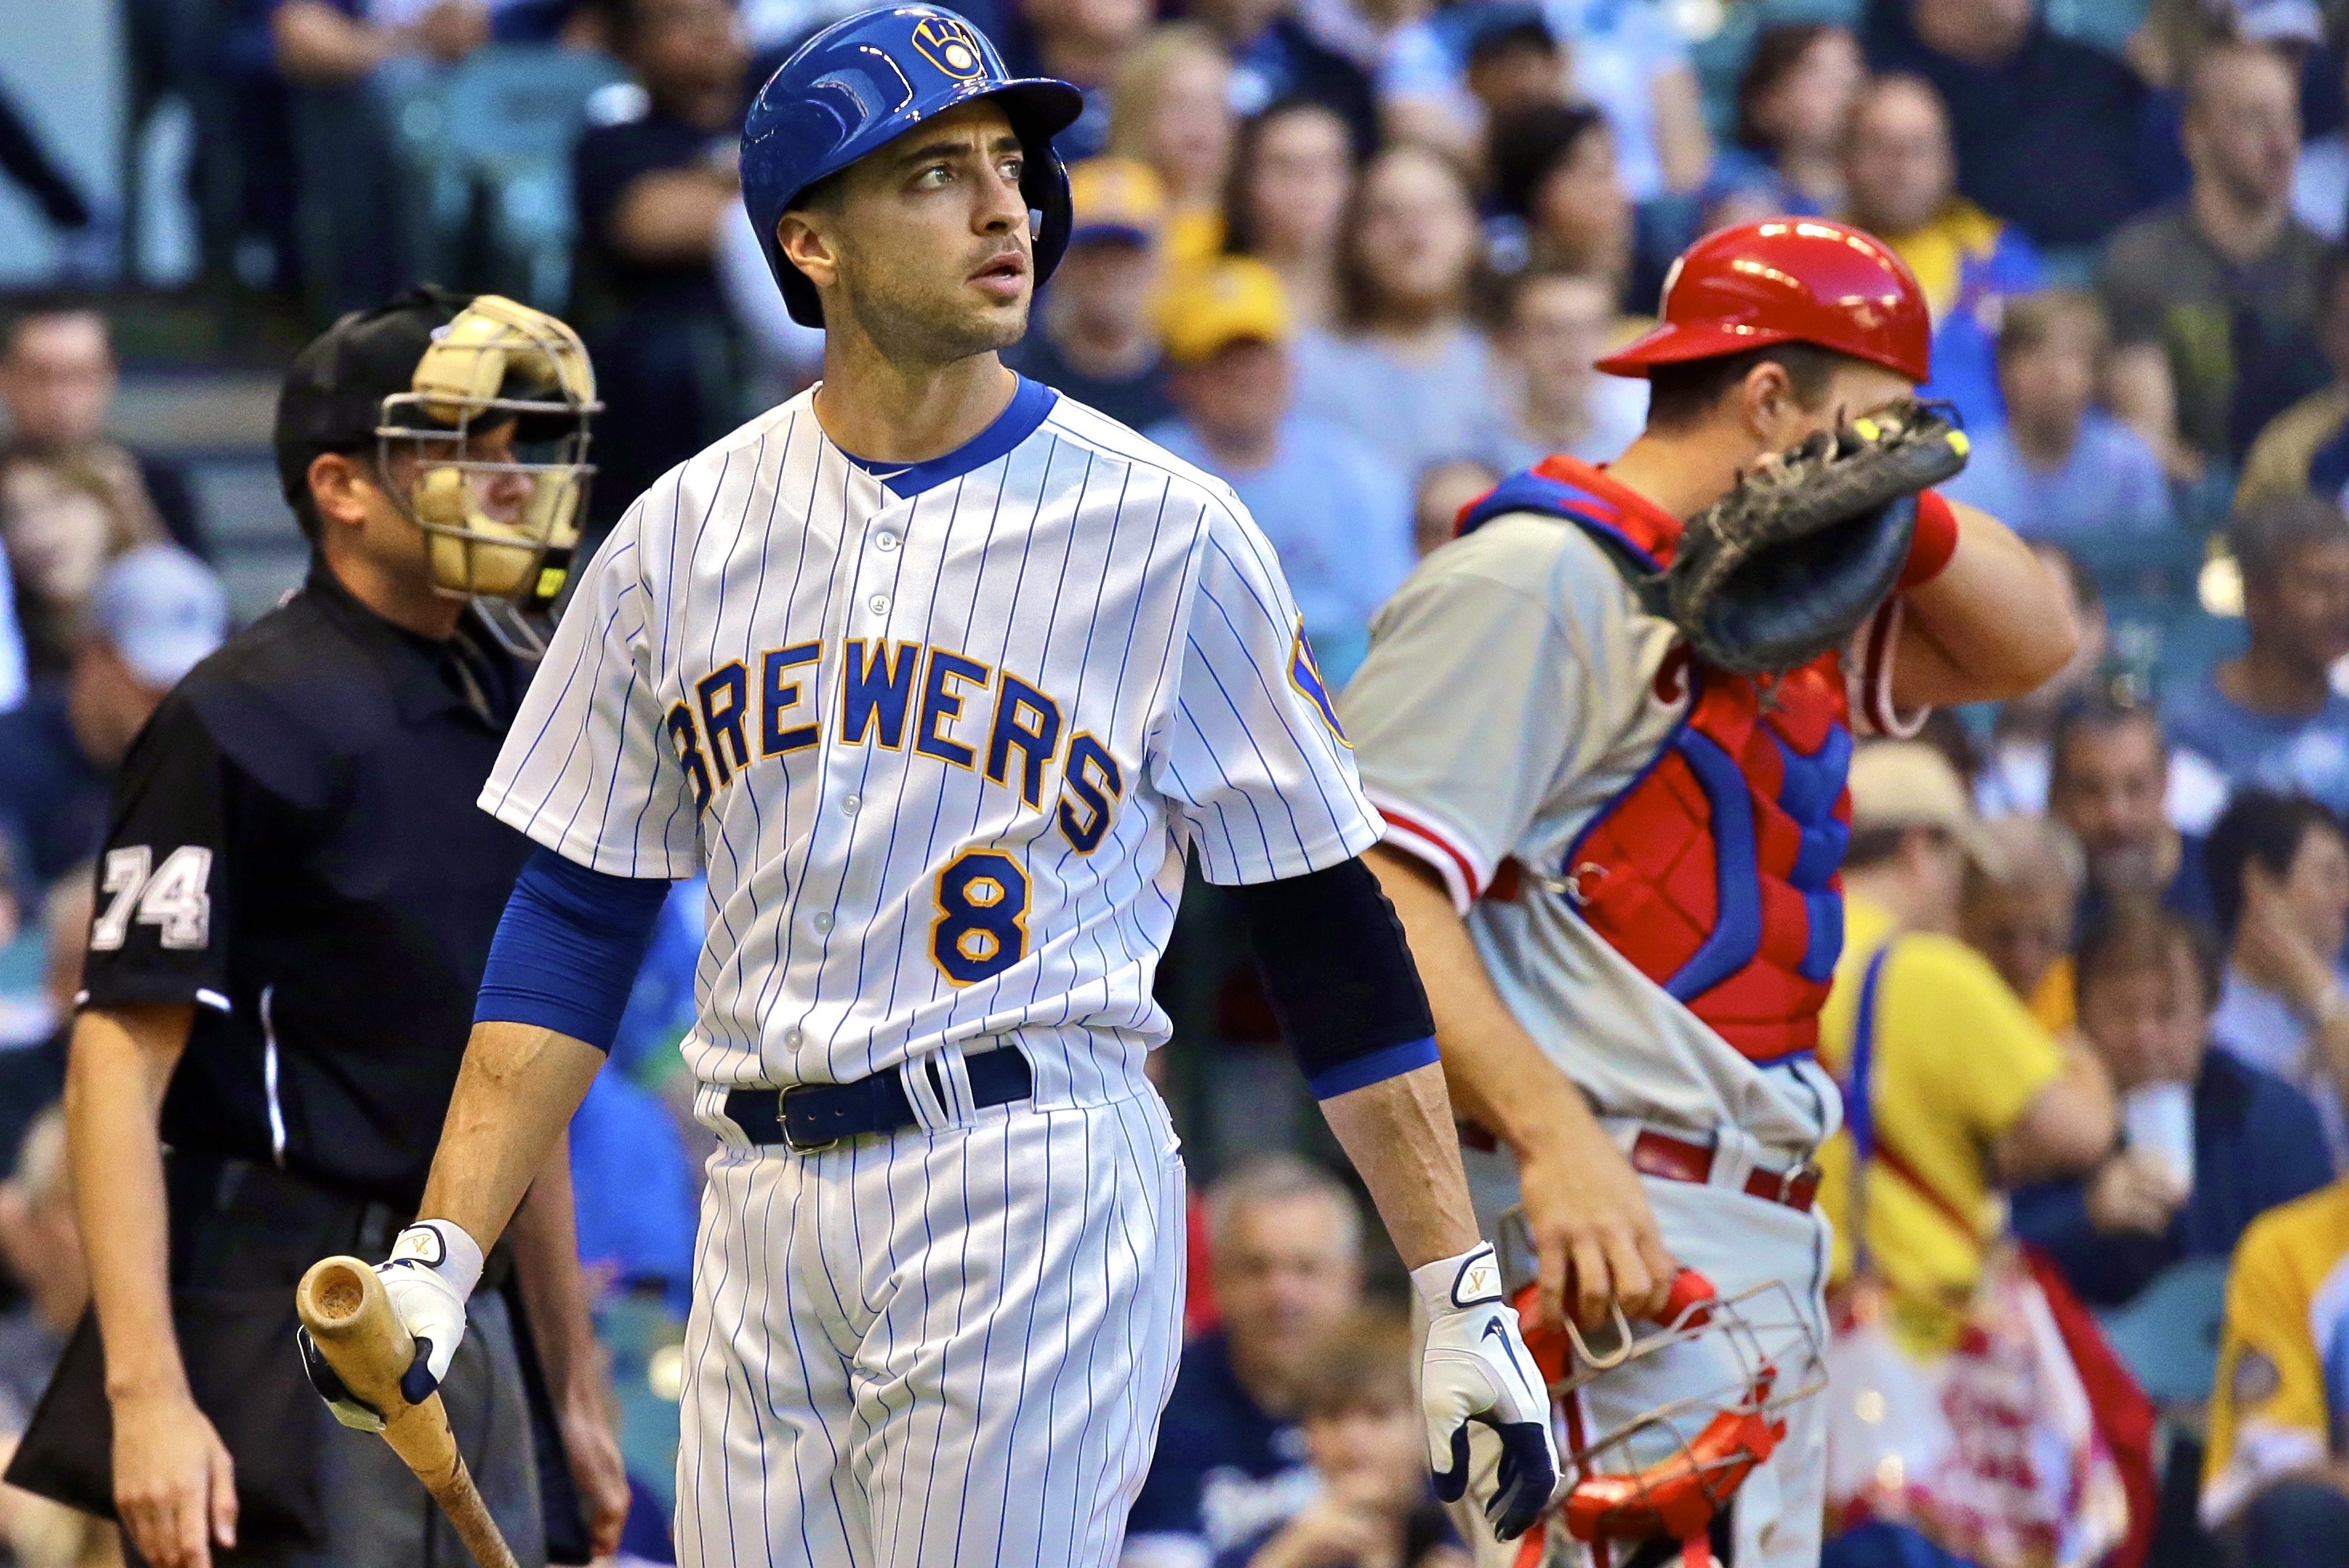 Brewers' Ryan Braun admits 'mistakes,' suspended for remainder of season